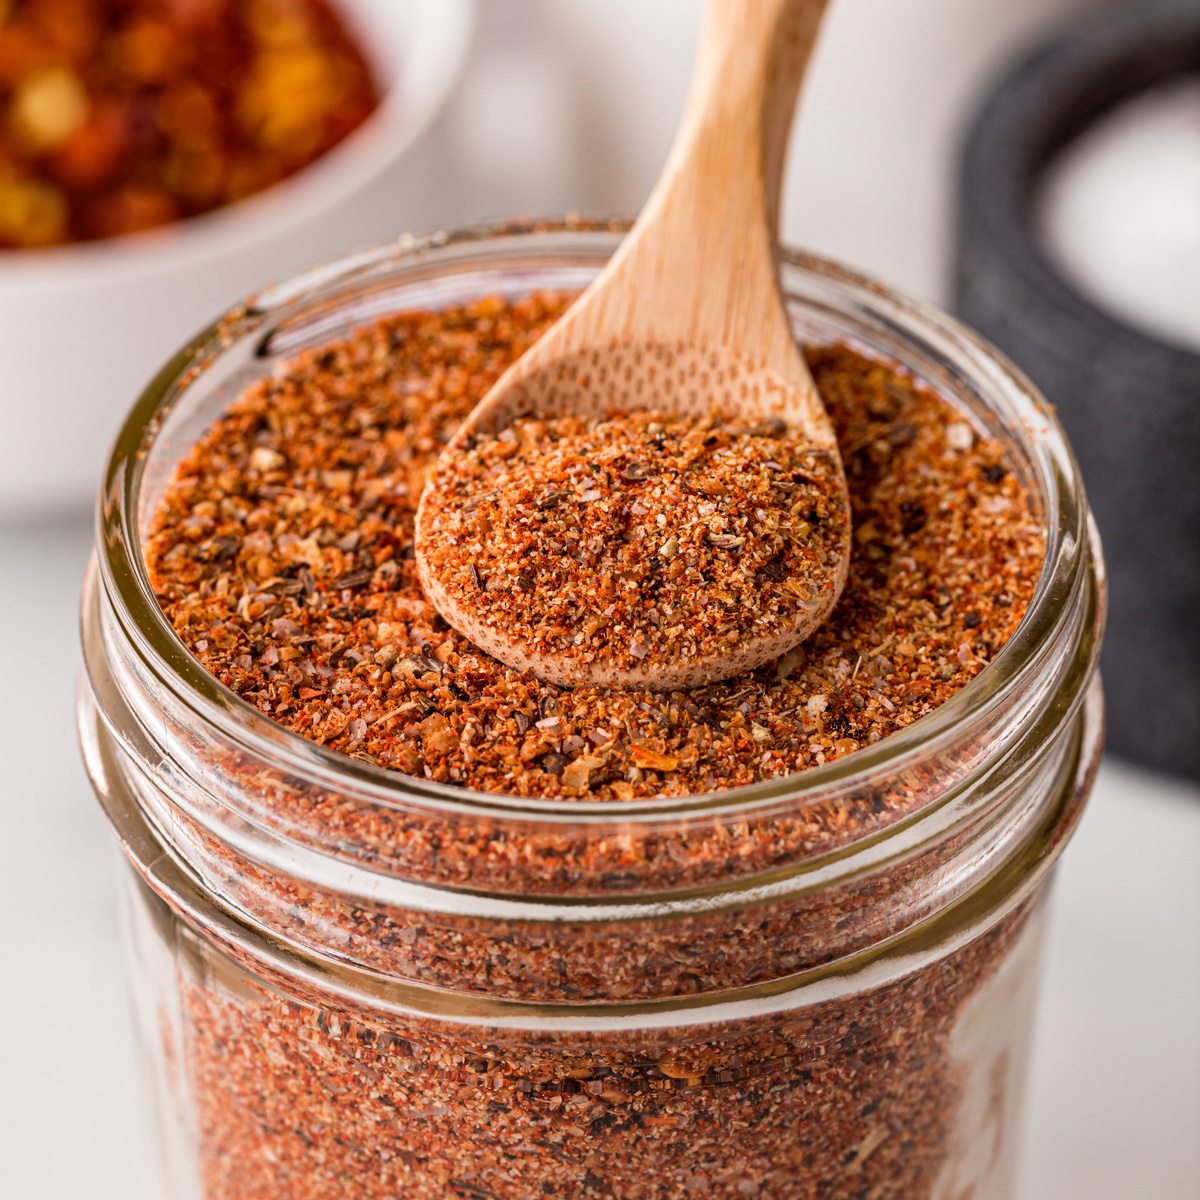 Mason jar filled with Montreal Steak Seasoning and a wooden spoon with a scoop of seasoning.